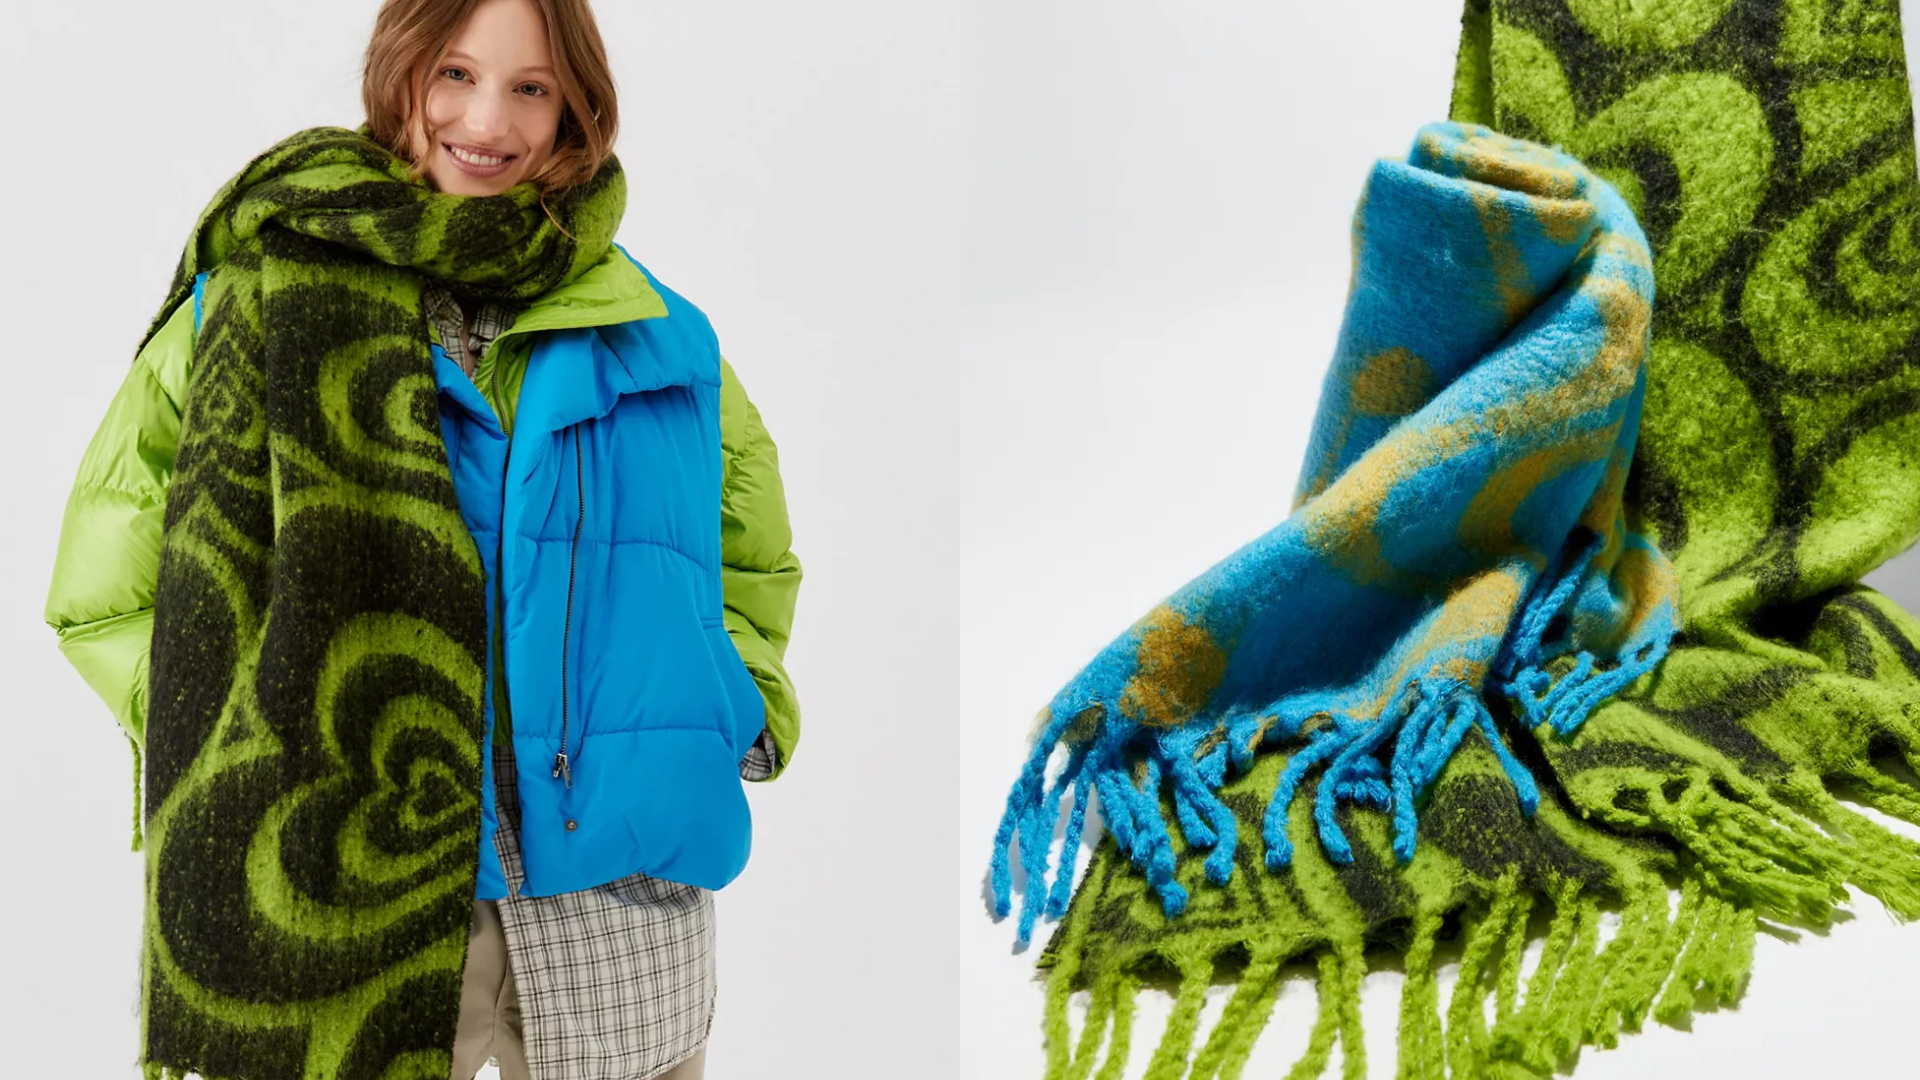 Snood theSkimm Aesthetic and Scarf Options Warm Winter Every for |